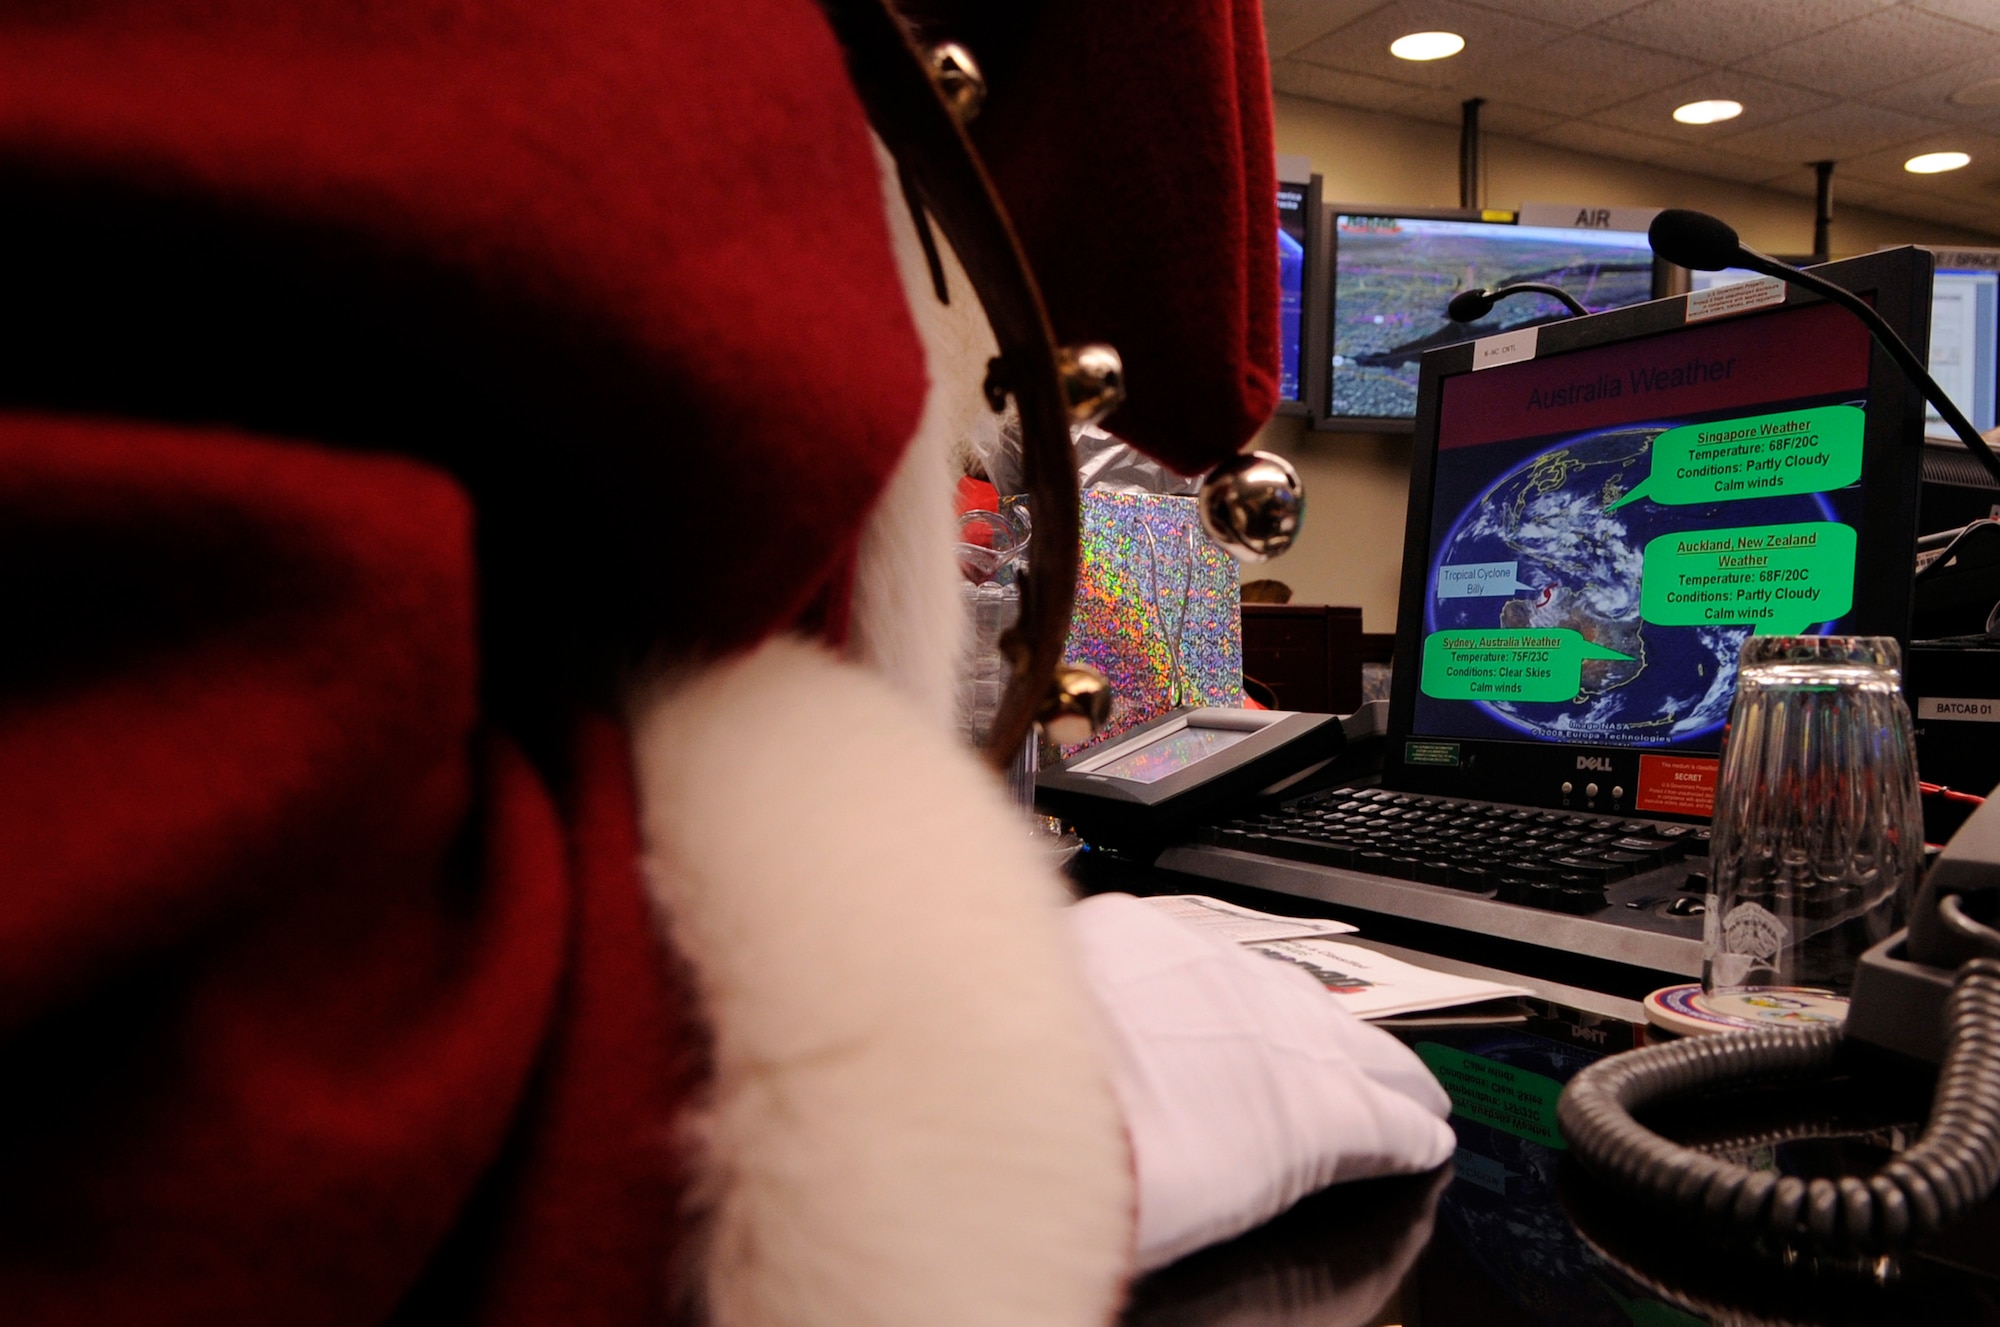 Santa Claus makes a surprise visit to the North American Aerospace Defense Command Tracks Santa Battle Cab Dec. 23 at Peterson Air Force Base, Colo. Santa received Federal Aviation Administration, weather and air mission briefs. (U.S. Air Force photo/Staff Sgt. Desiree N. Palacios) 

